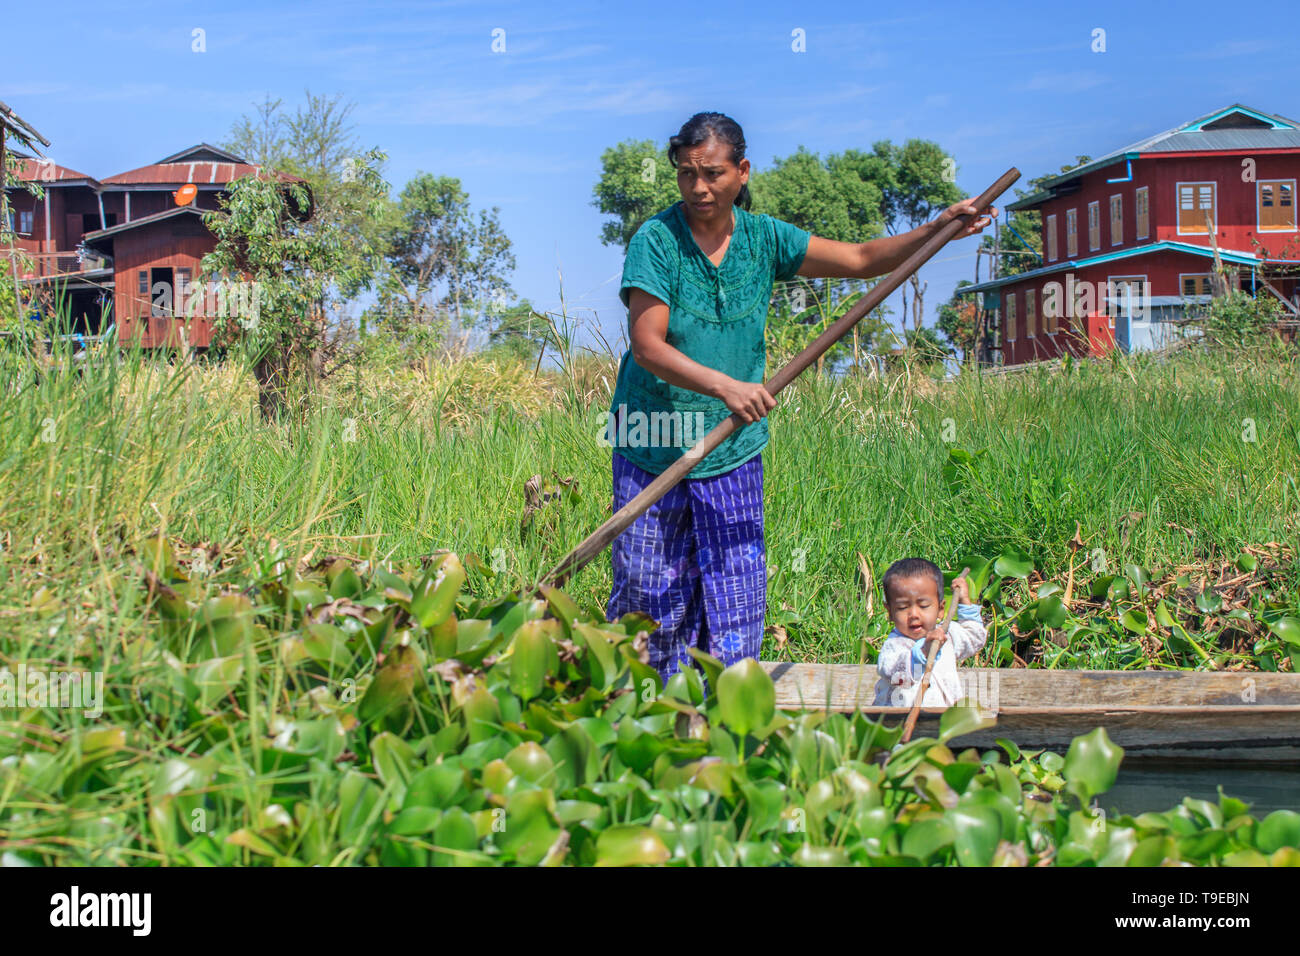 Woman with her child on a canoe in the middle of her floating vegetable garden Stock Photo